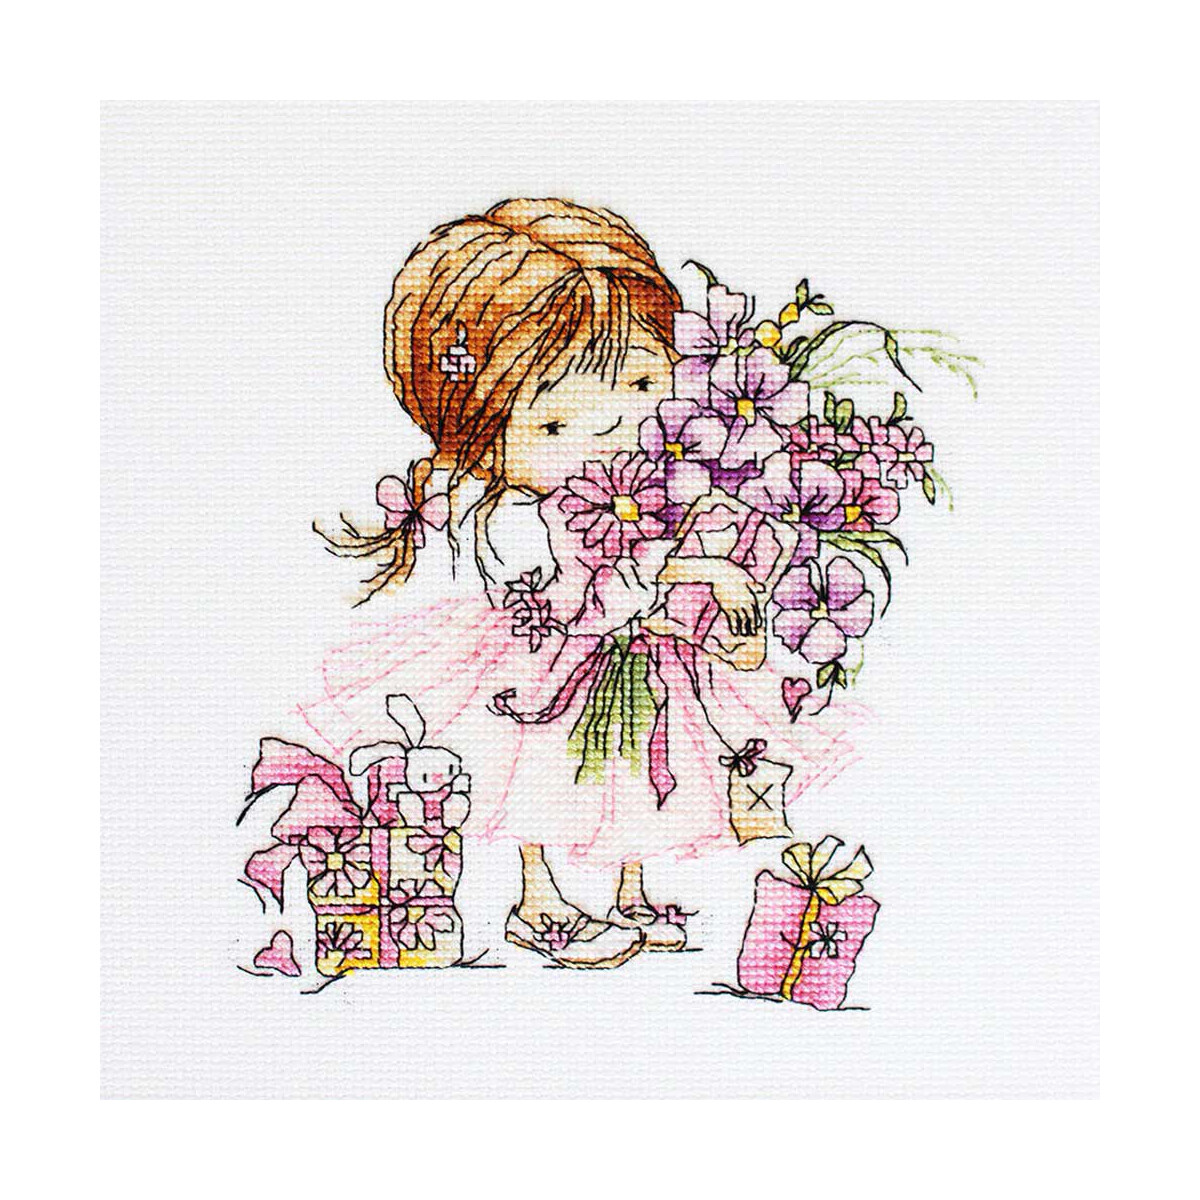 A delicate illustration of a young girl with brown hair...